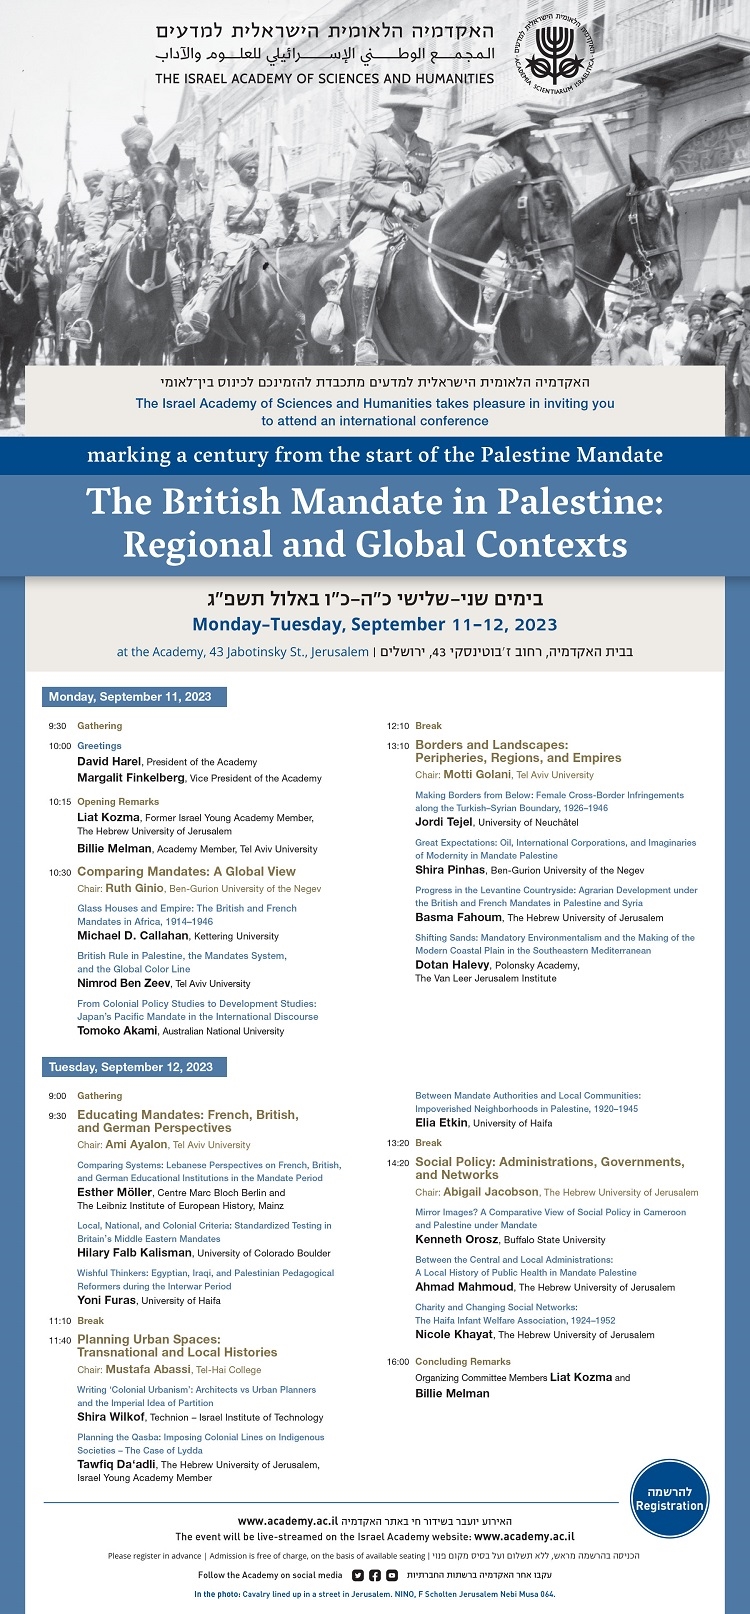 The British Mandate in Palestine: Regional and Global Contexts